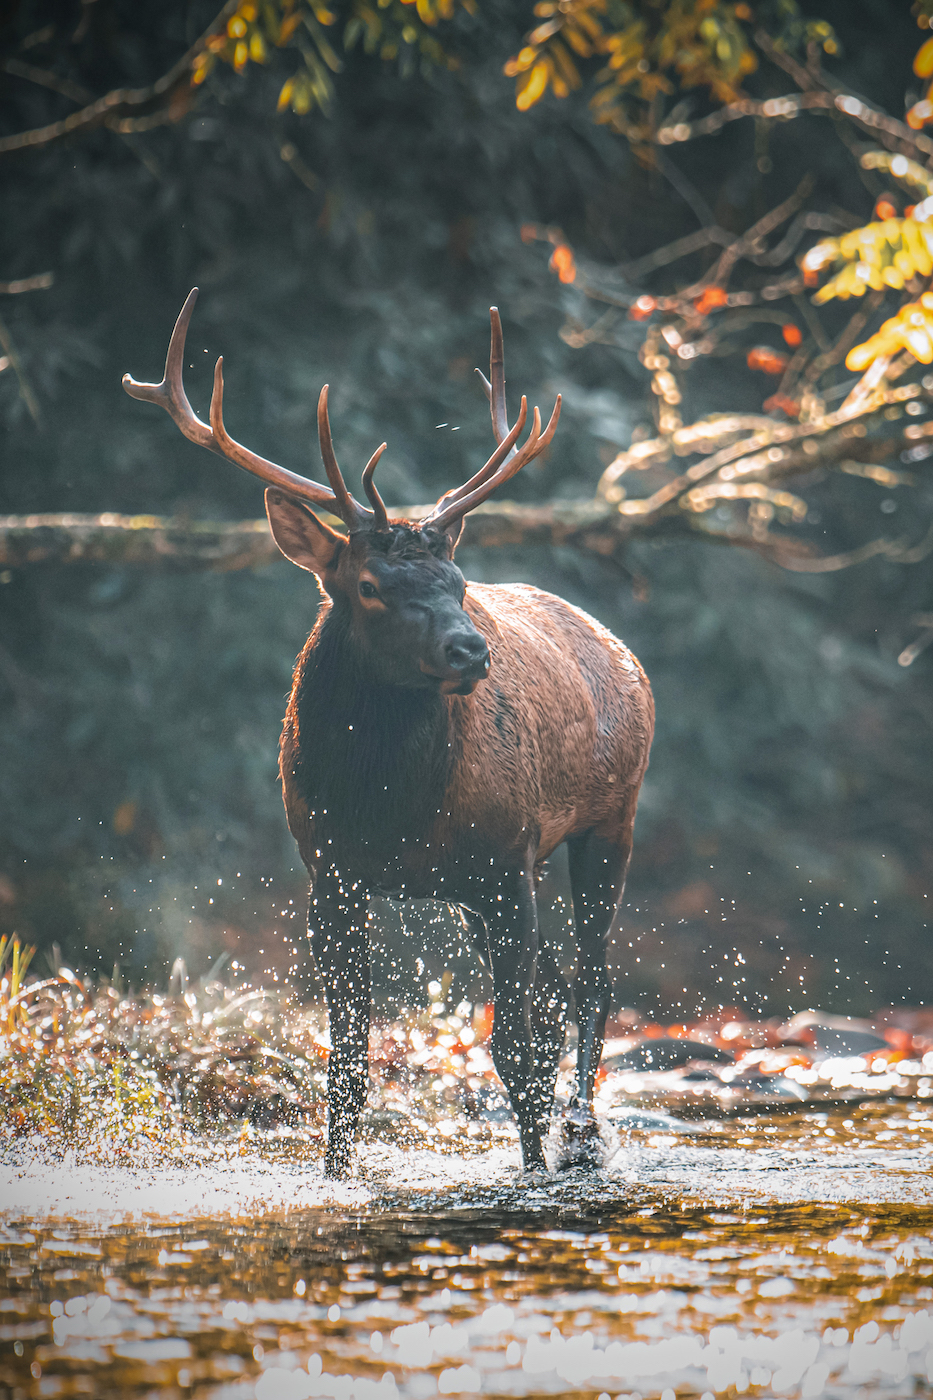 North Carolina wildlife includes elk like the one pictured here with full antlers